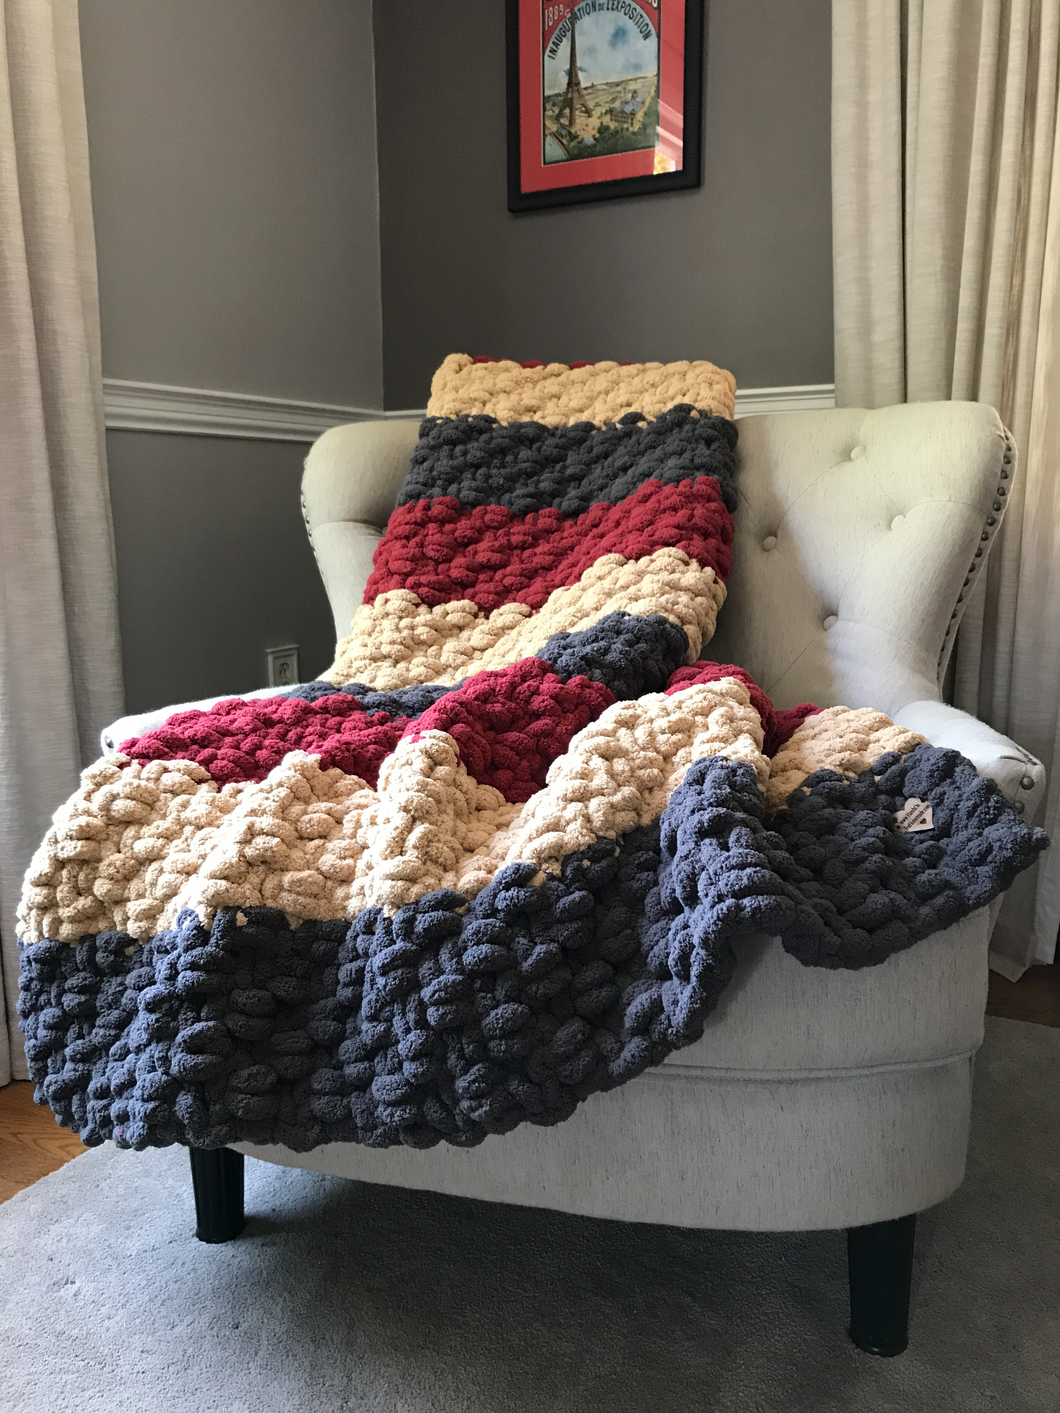 Chunky Knit Blanket - Red Beige and Gray Knit Throw - Soft Chenille Knit Blanket - Hands On For Homemade